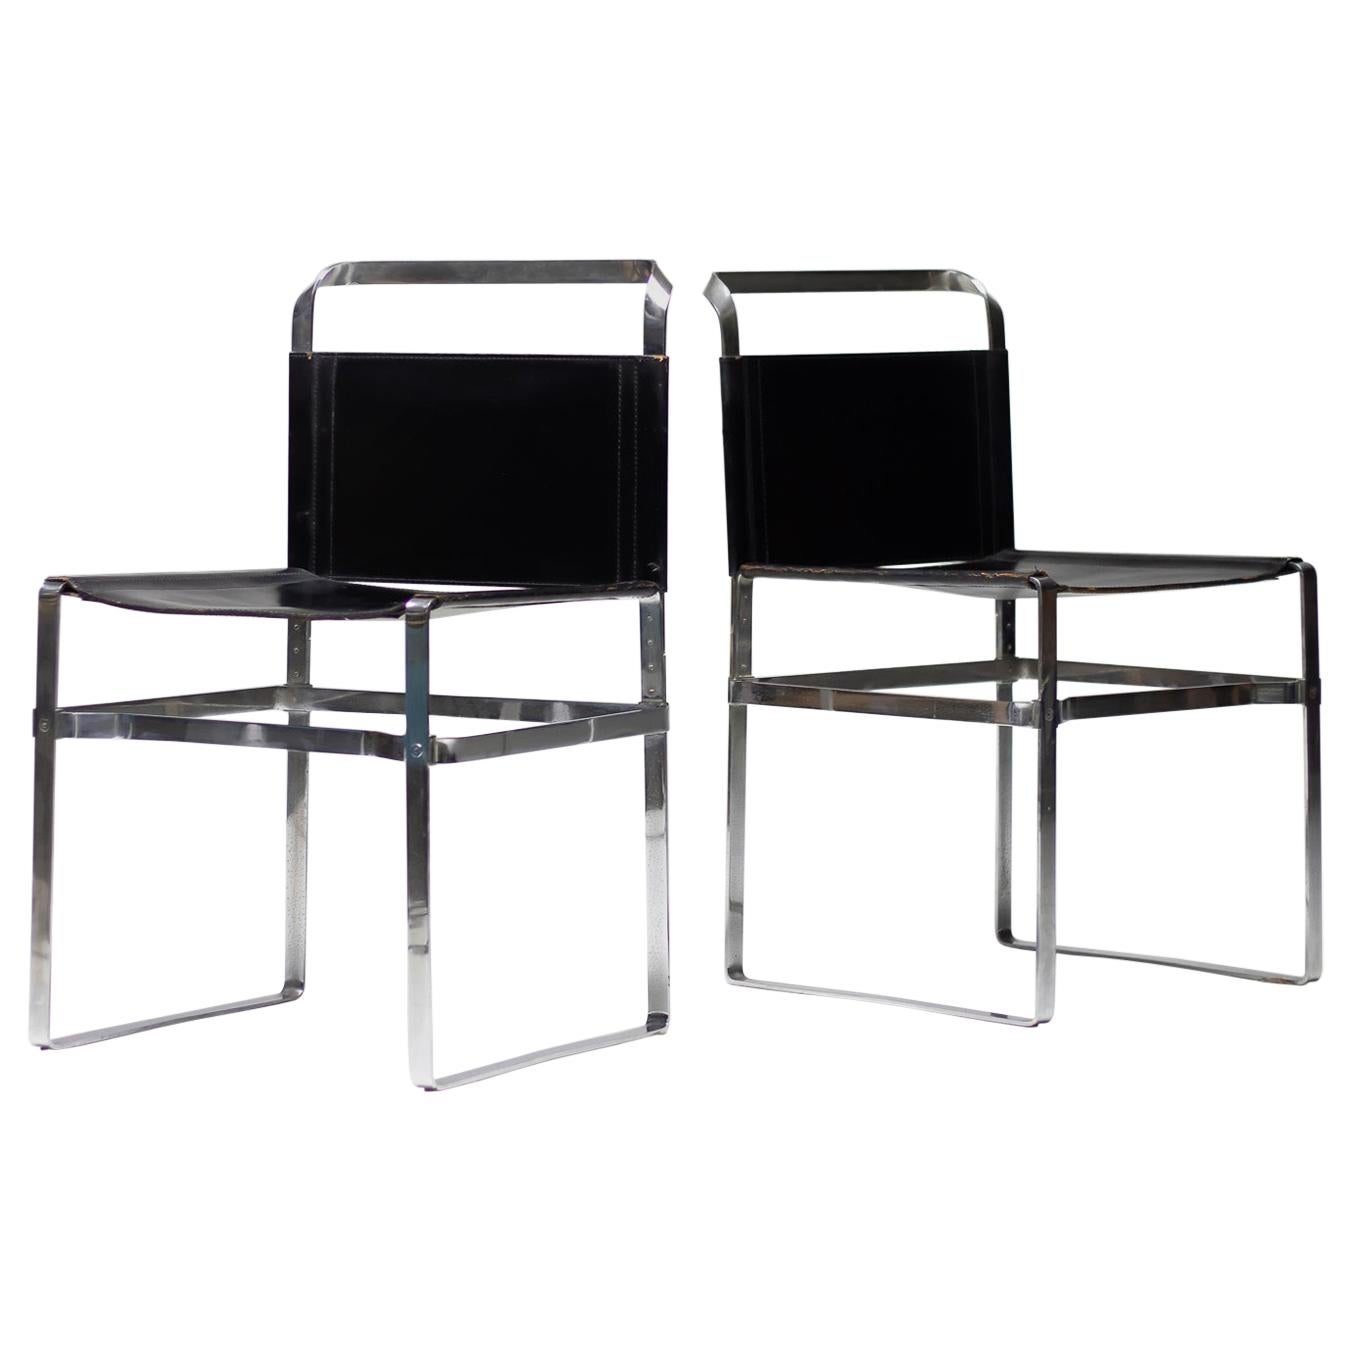 Architectural Leather Strip Chairs